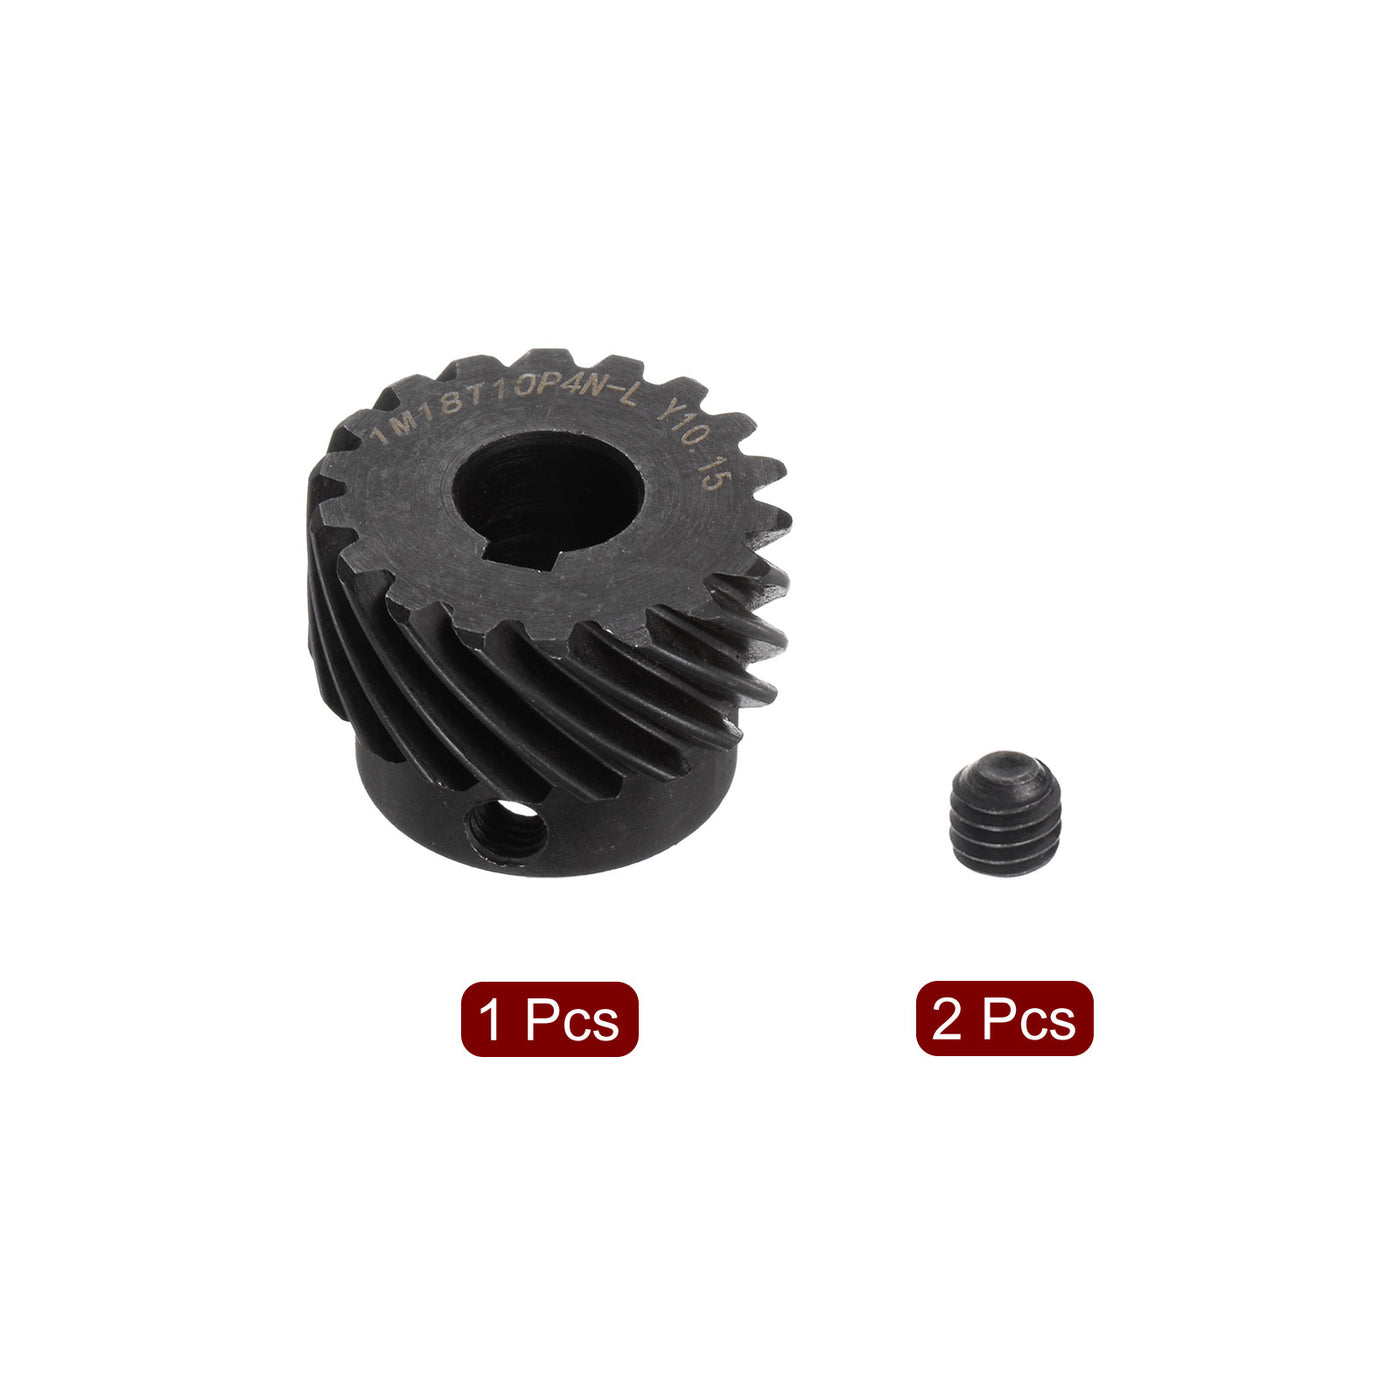 uxcell Uxcell 10mm Aperture 18T Helical Gear 1 Mod 4x1.8mm Keyway Motor Gear, Left Direction